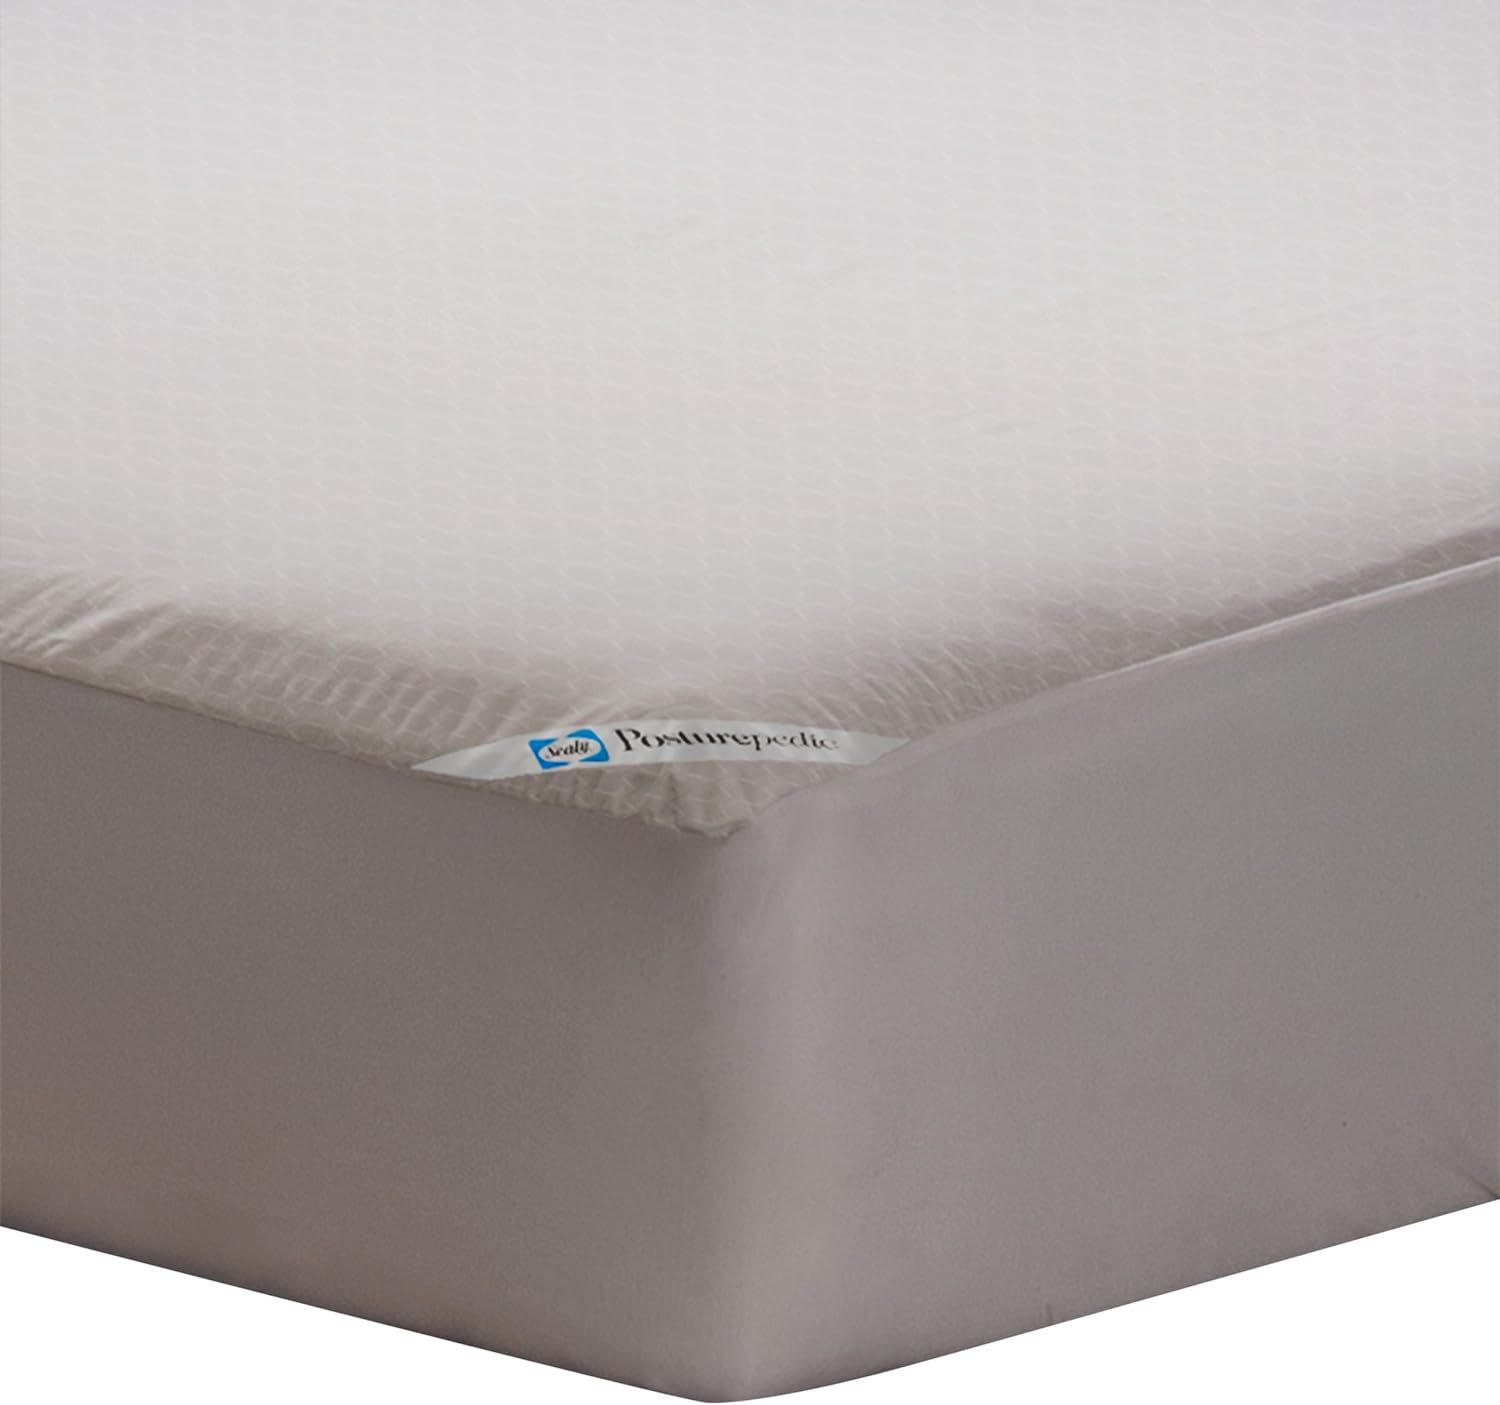 Mattress Protector With Zipper, Sealy Posturepedic Allergy Protection. - $31.92